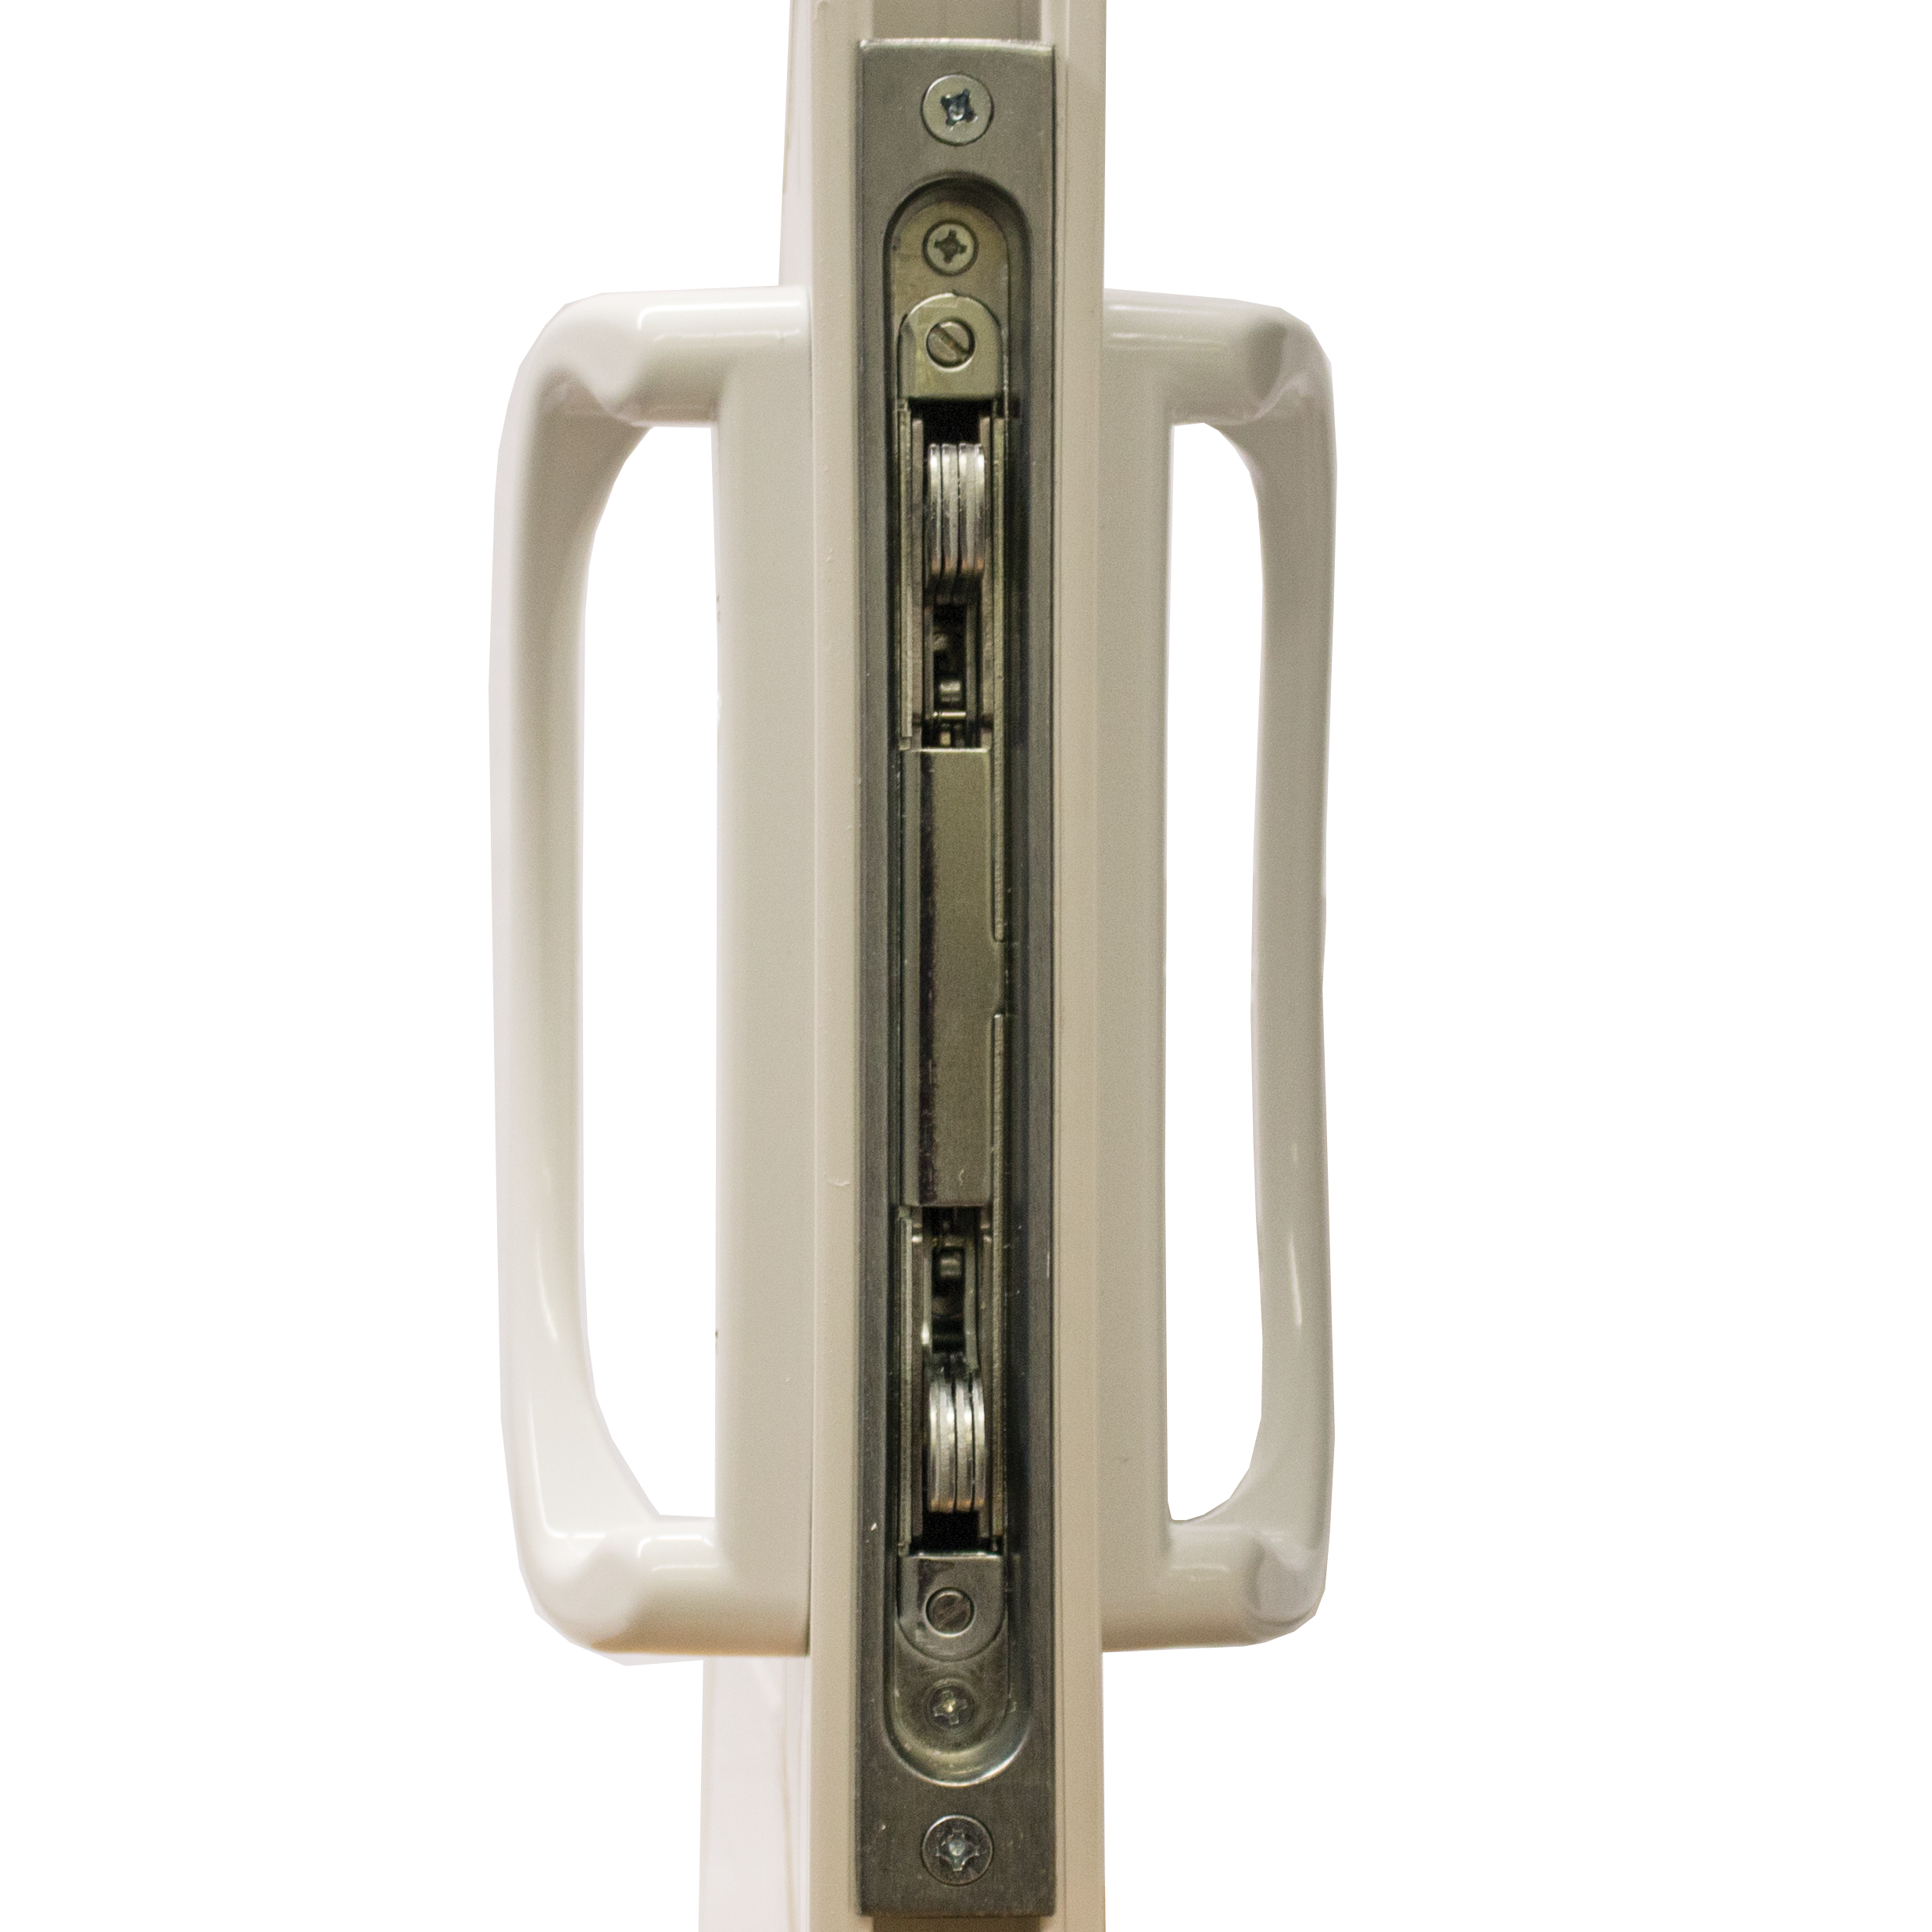 Multi-point locking system for tight fit and added security.